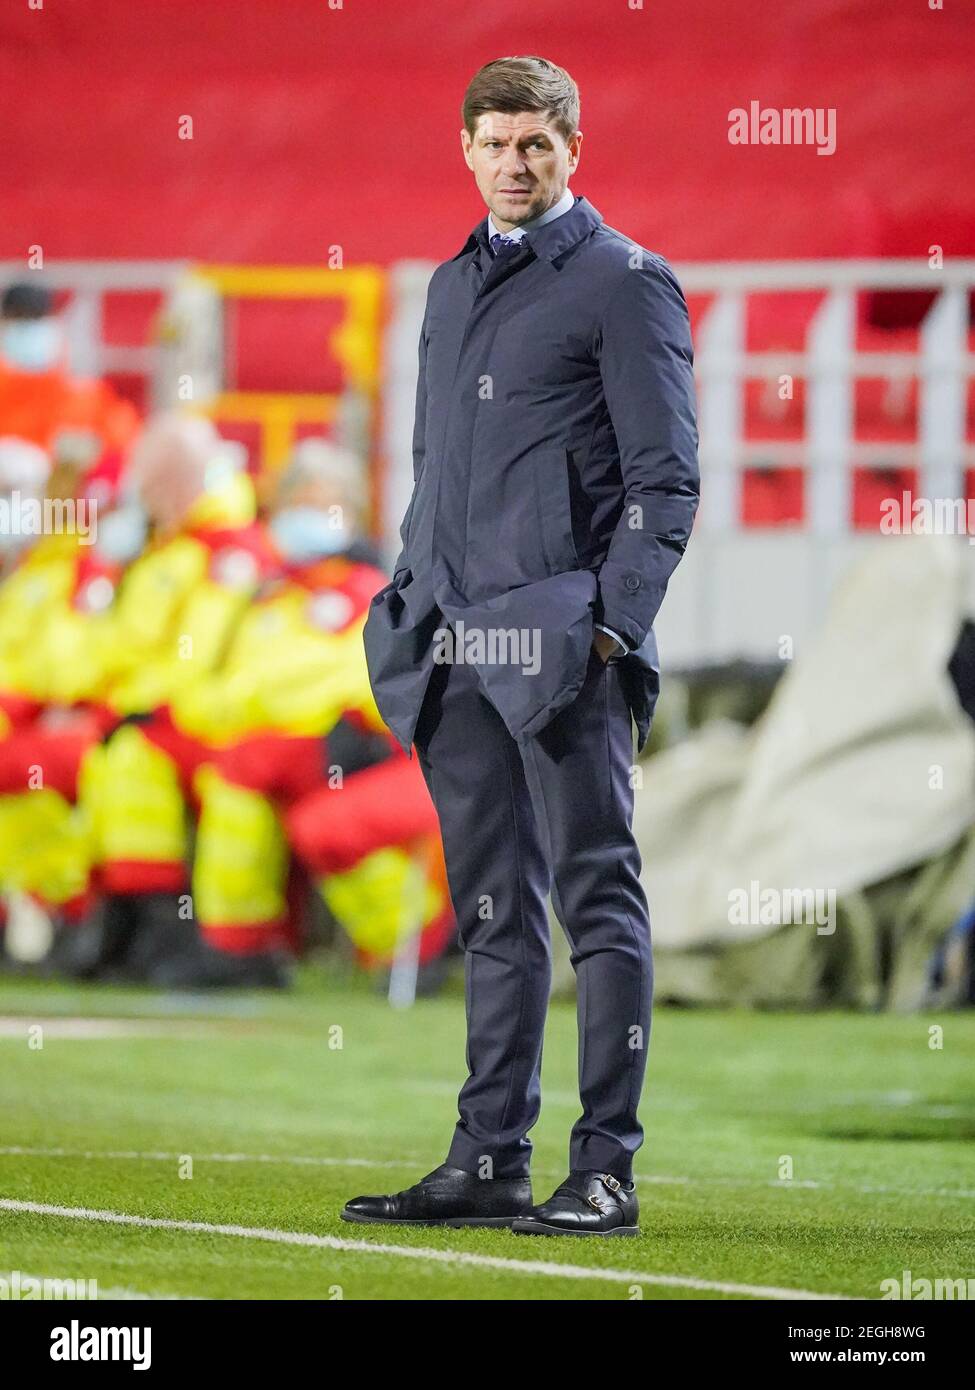 LILLE, FRANCE - FEBRUARY 18: coach Steven Gerrard of Rangers FC during the UEFA Europa League match between Lille OSC and Ajax at Stade Pierre Mauroy Stock Photo